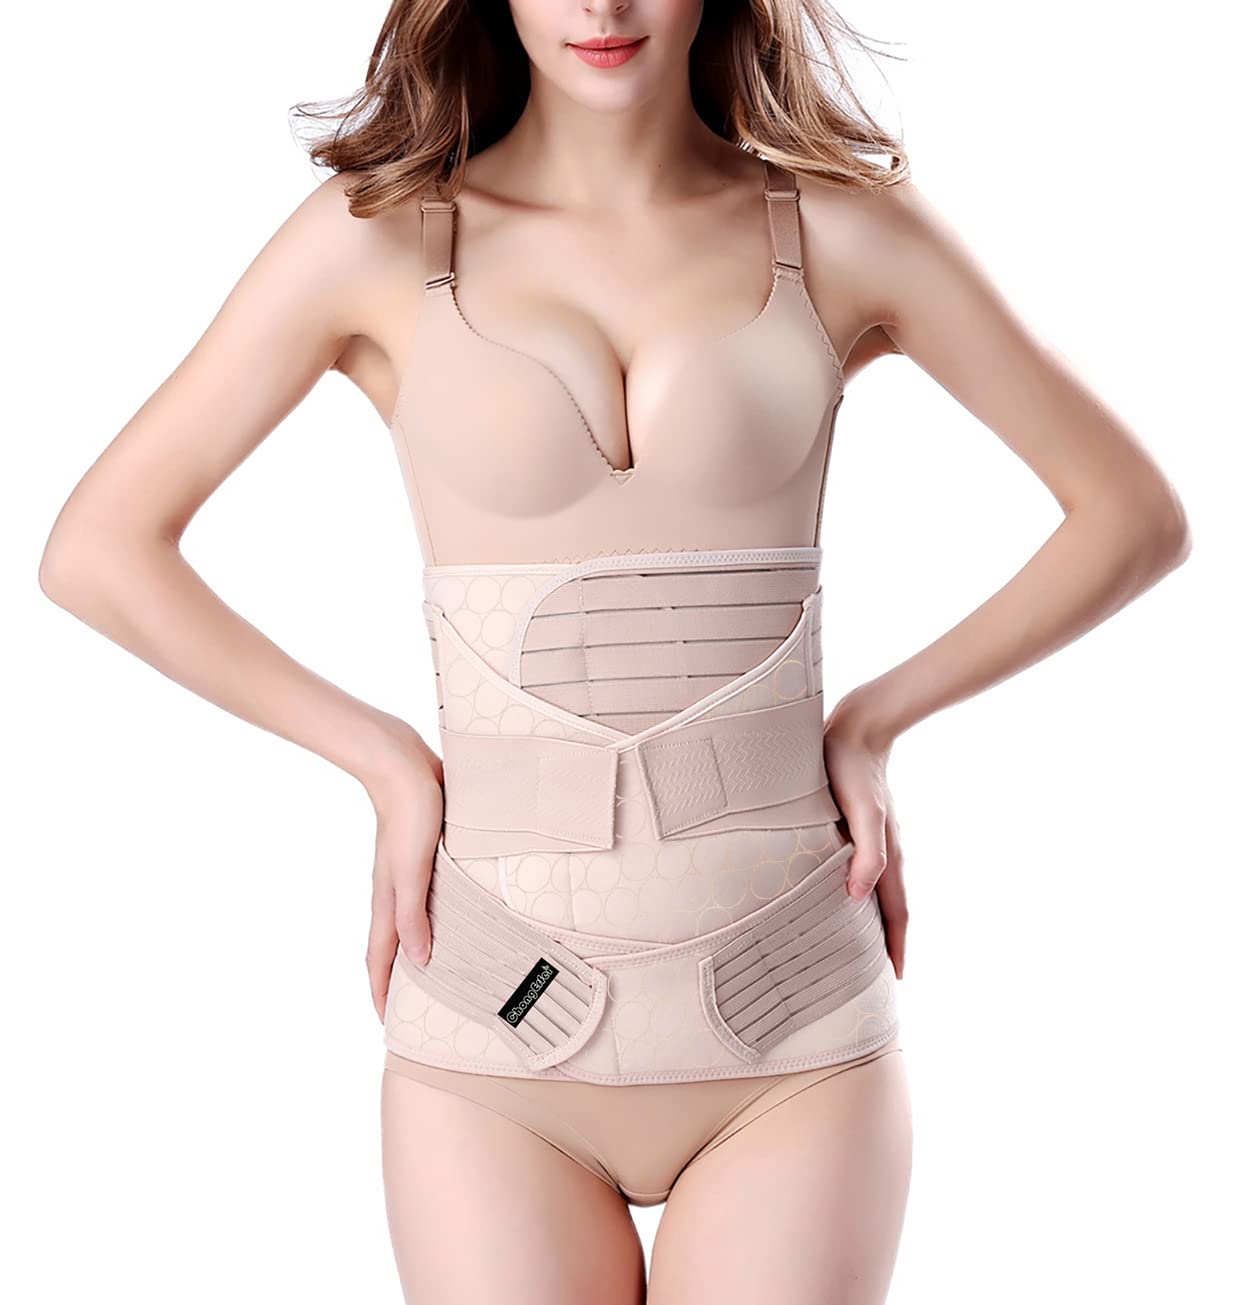 Book Cover ChongErfei 3 in 1 Postpartum Support - Recovery Belly/waist/pelvis Belt Shapewear Slimming Girdle, Beige, One Size Beige One Size (Pack of 1)